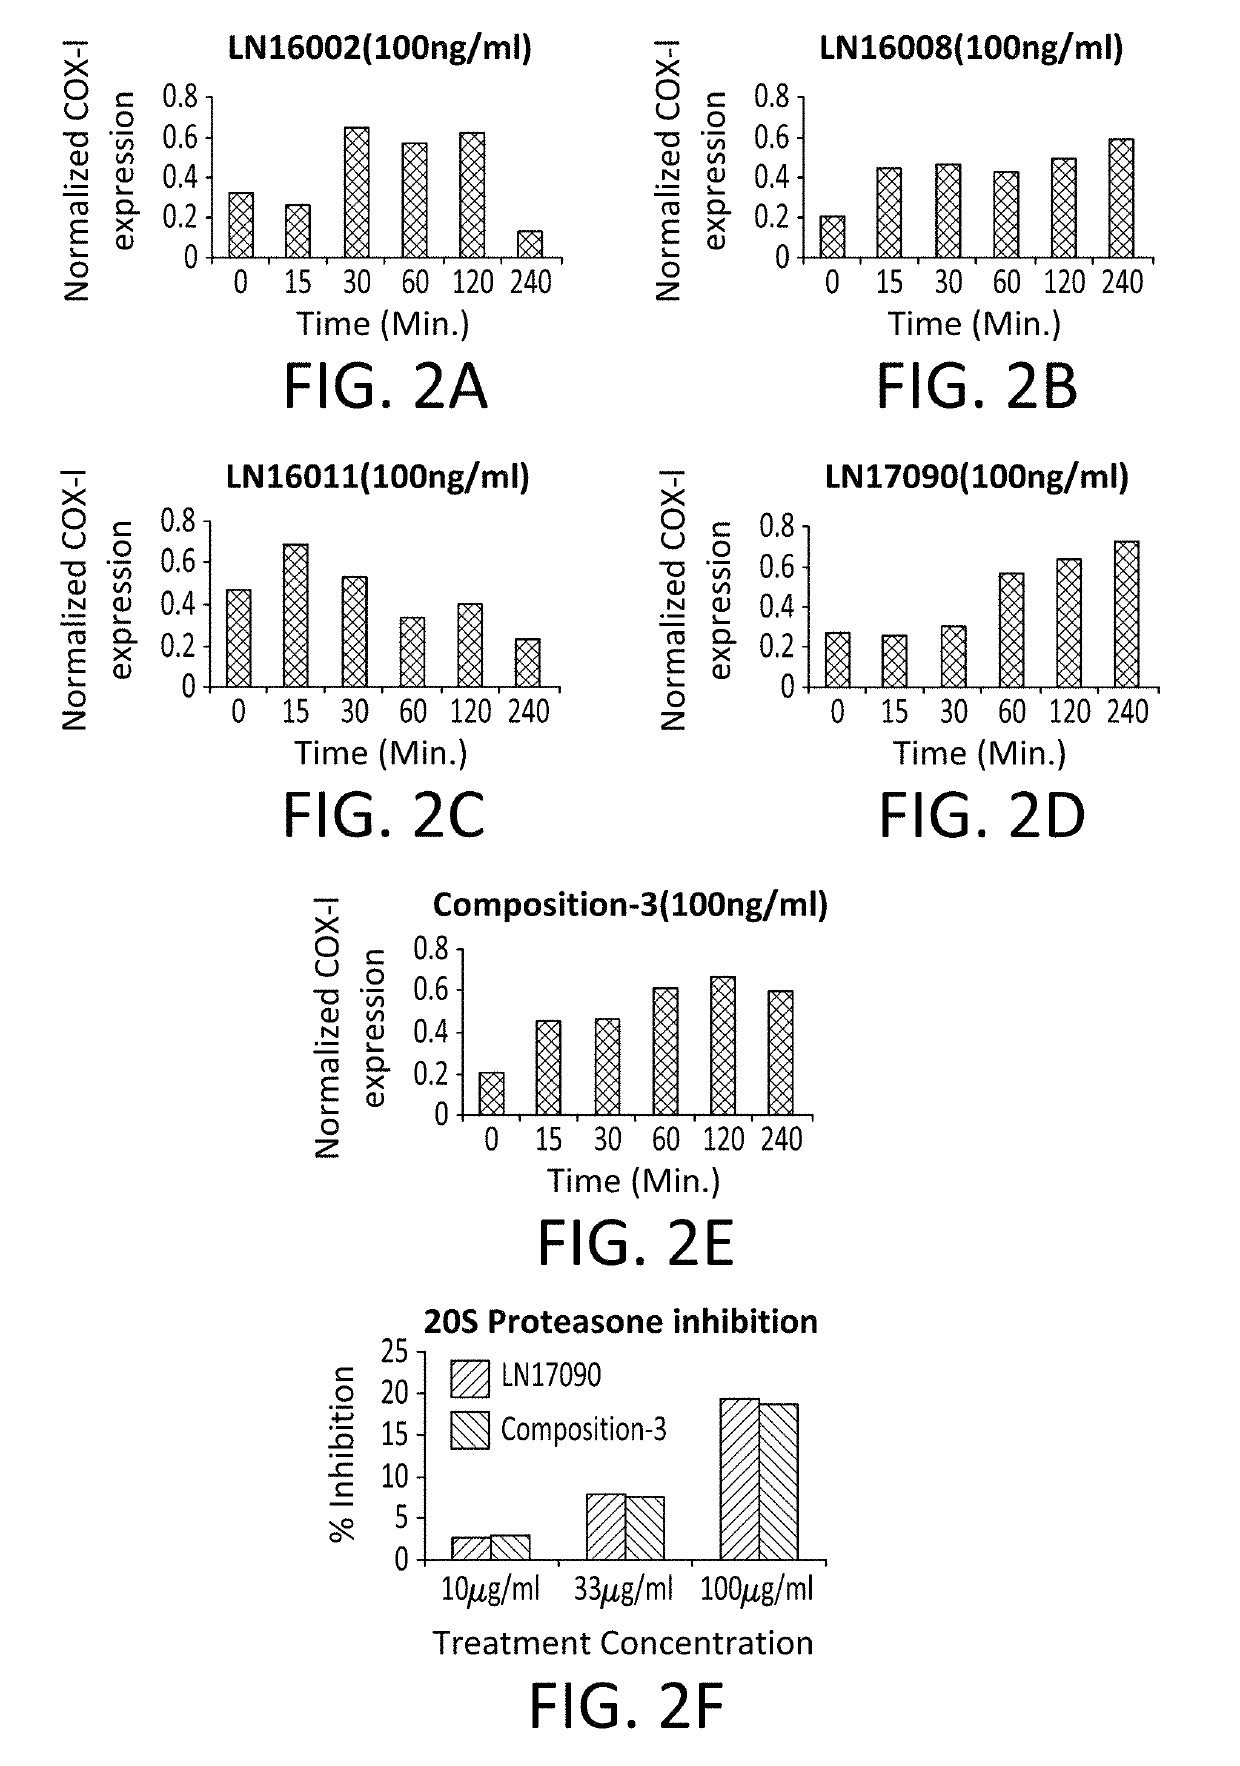 Dietary supplements and compositions for enhancing physical performance and energy levels